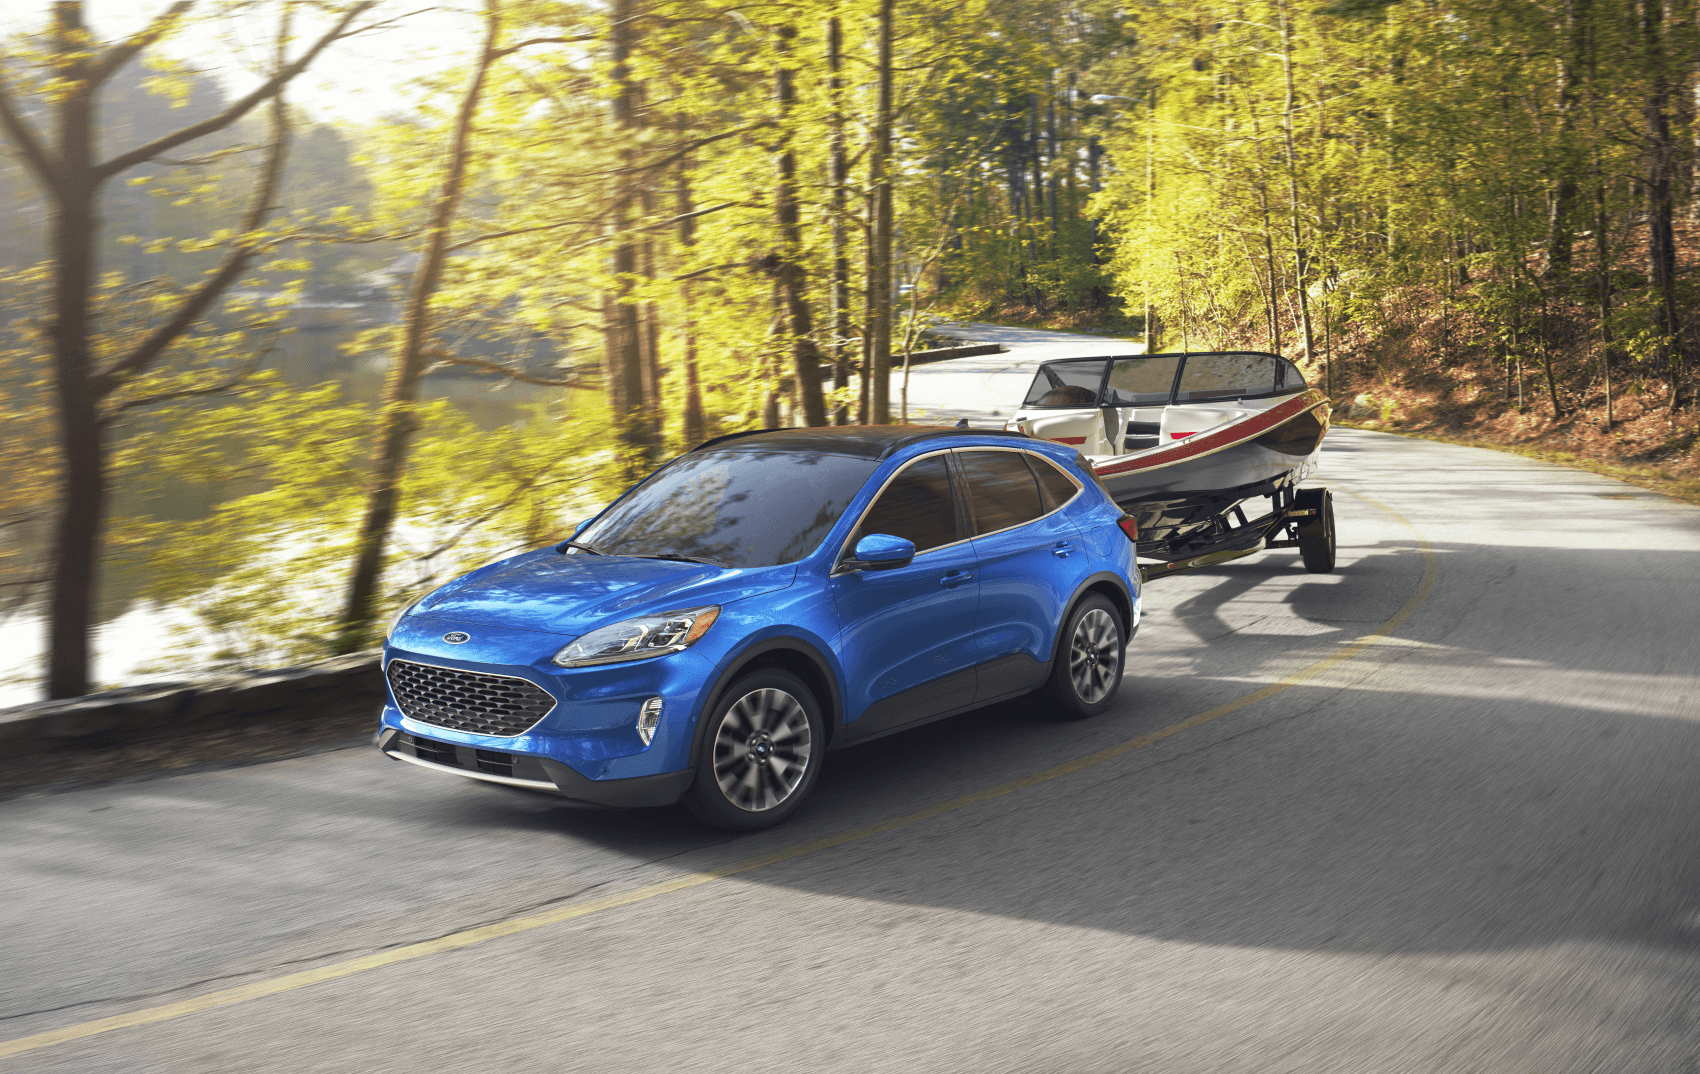 2021 Ford Escape Blue Towing Boat Tunkhannock Ford